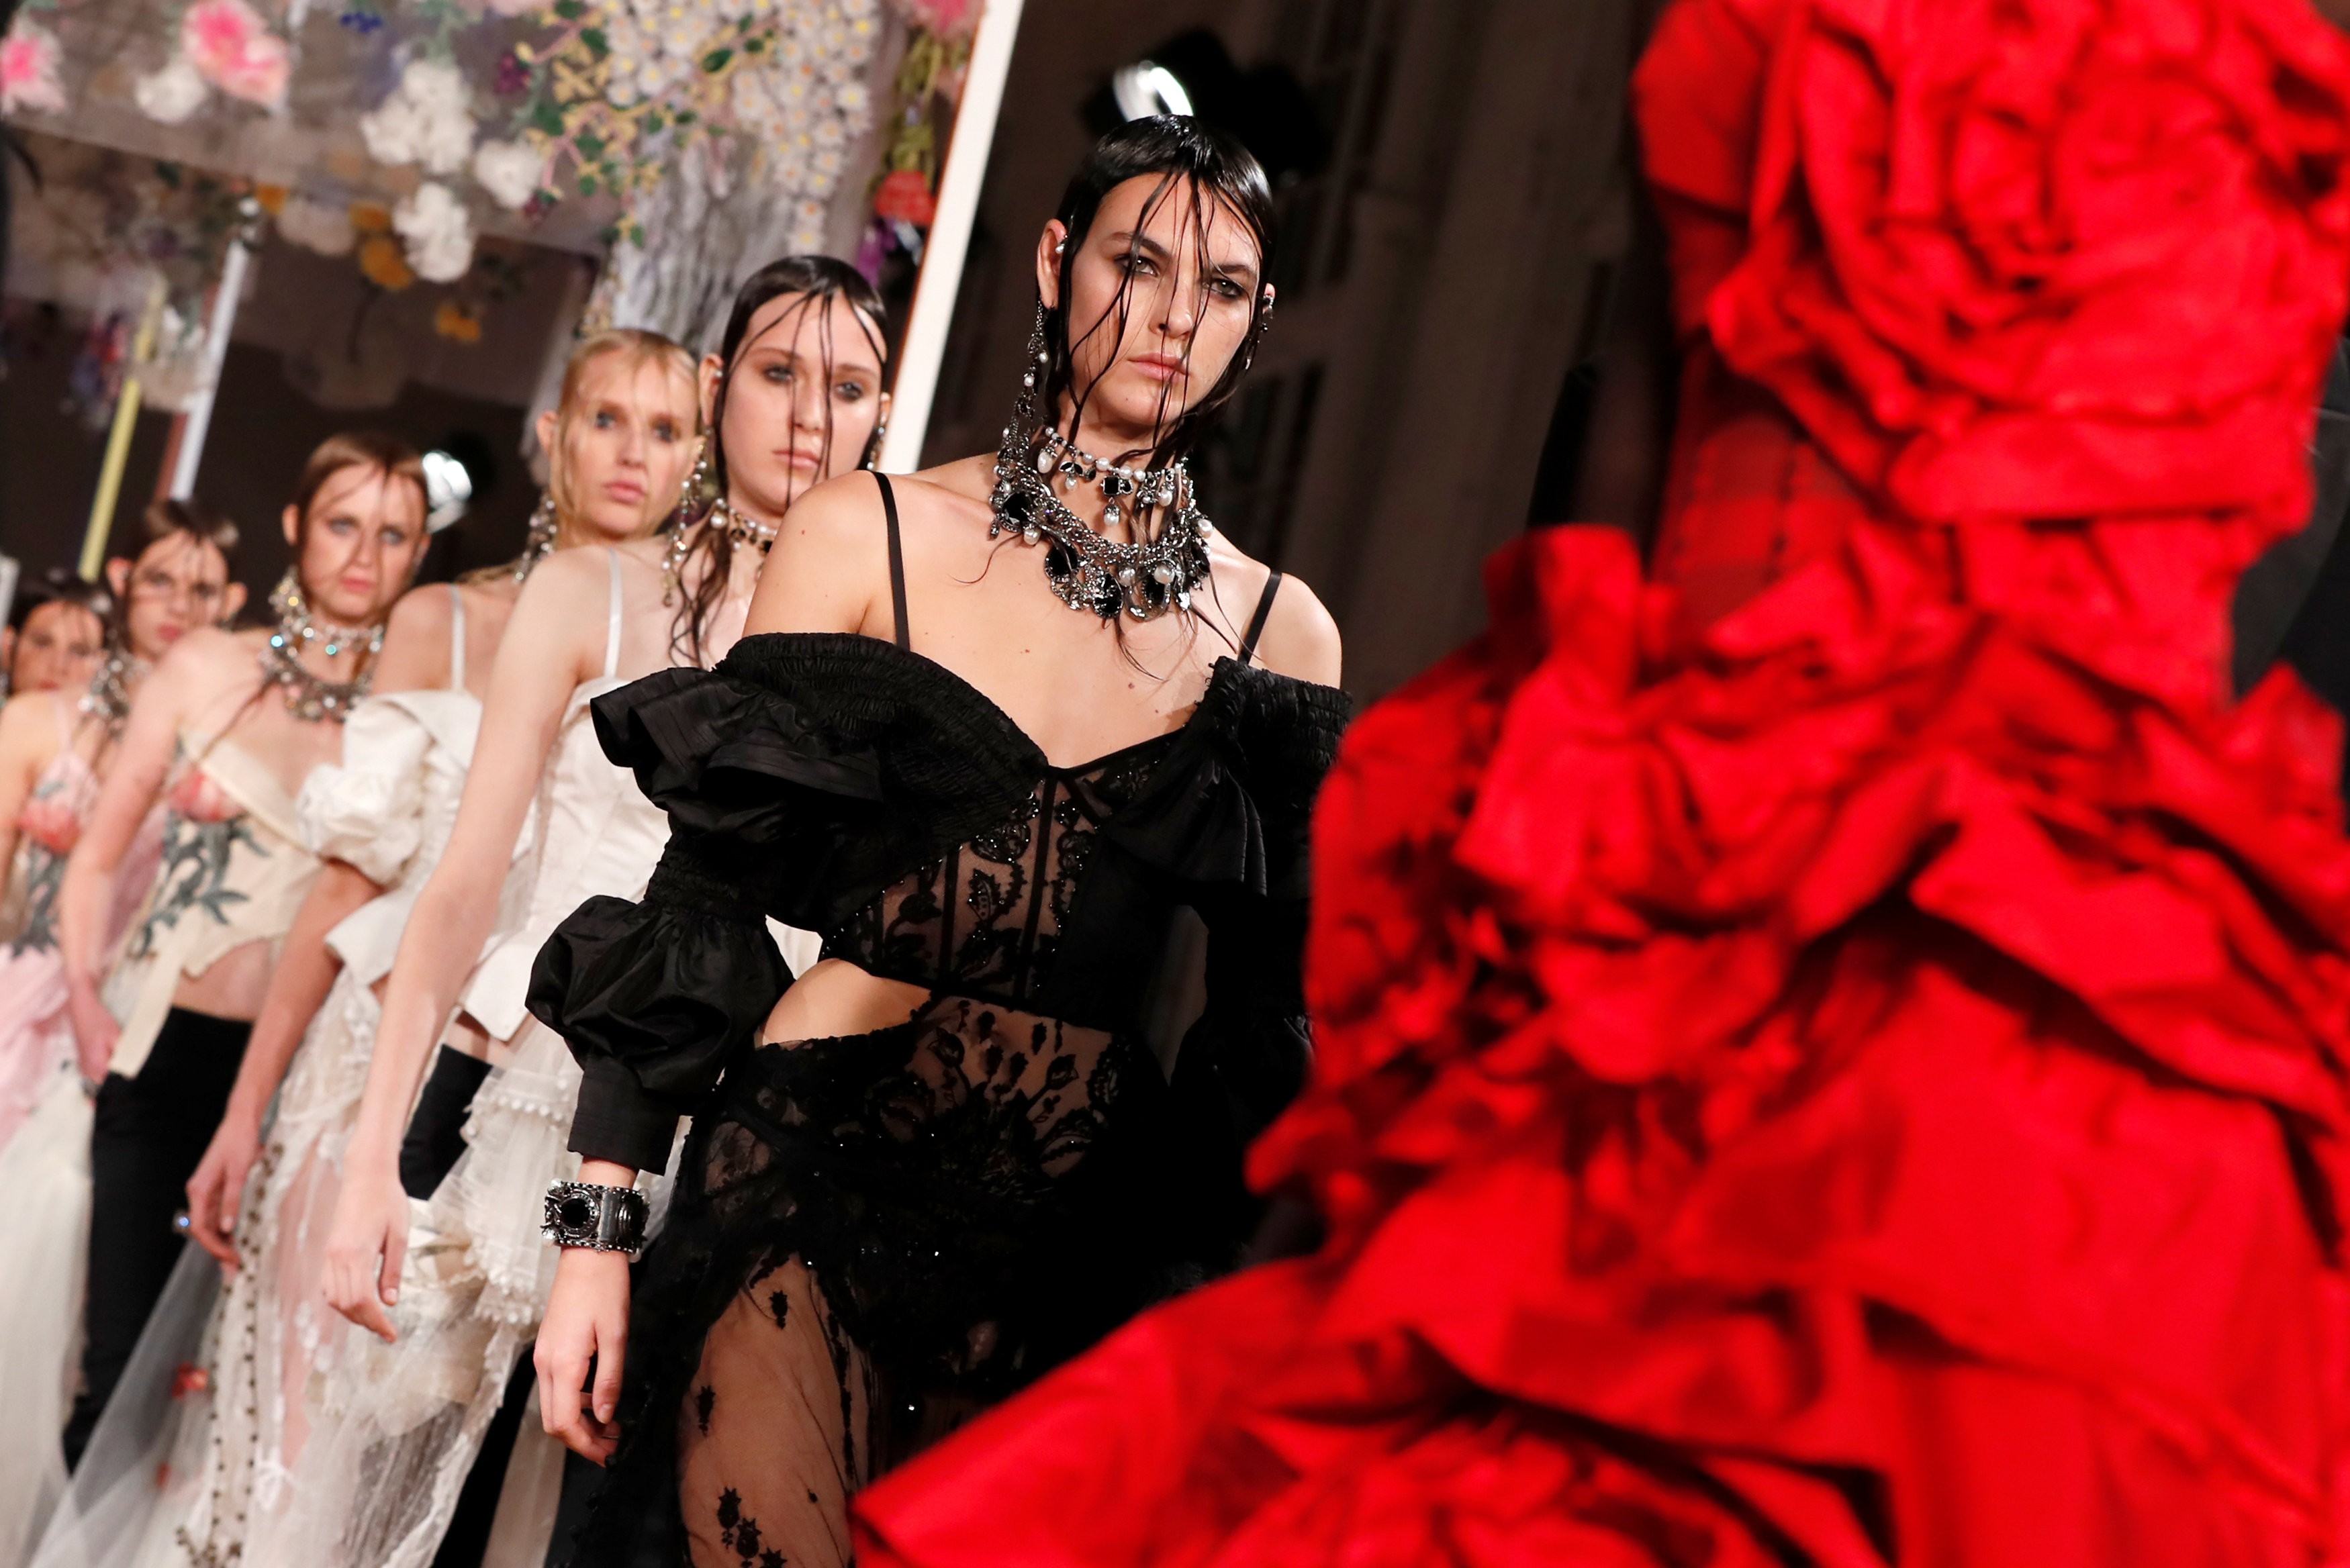 Some fashion collections are made to be grand spectacles, others meant to be appreciated up close, with intricate and painstaking details that please the wearers. Sarah Burton’s vision for Alexander McQueen is both and beyond